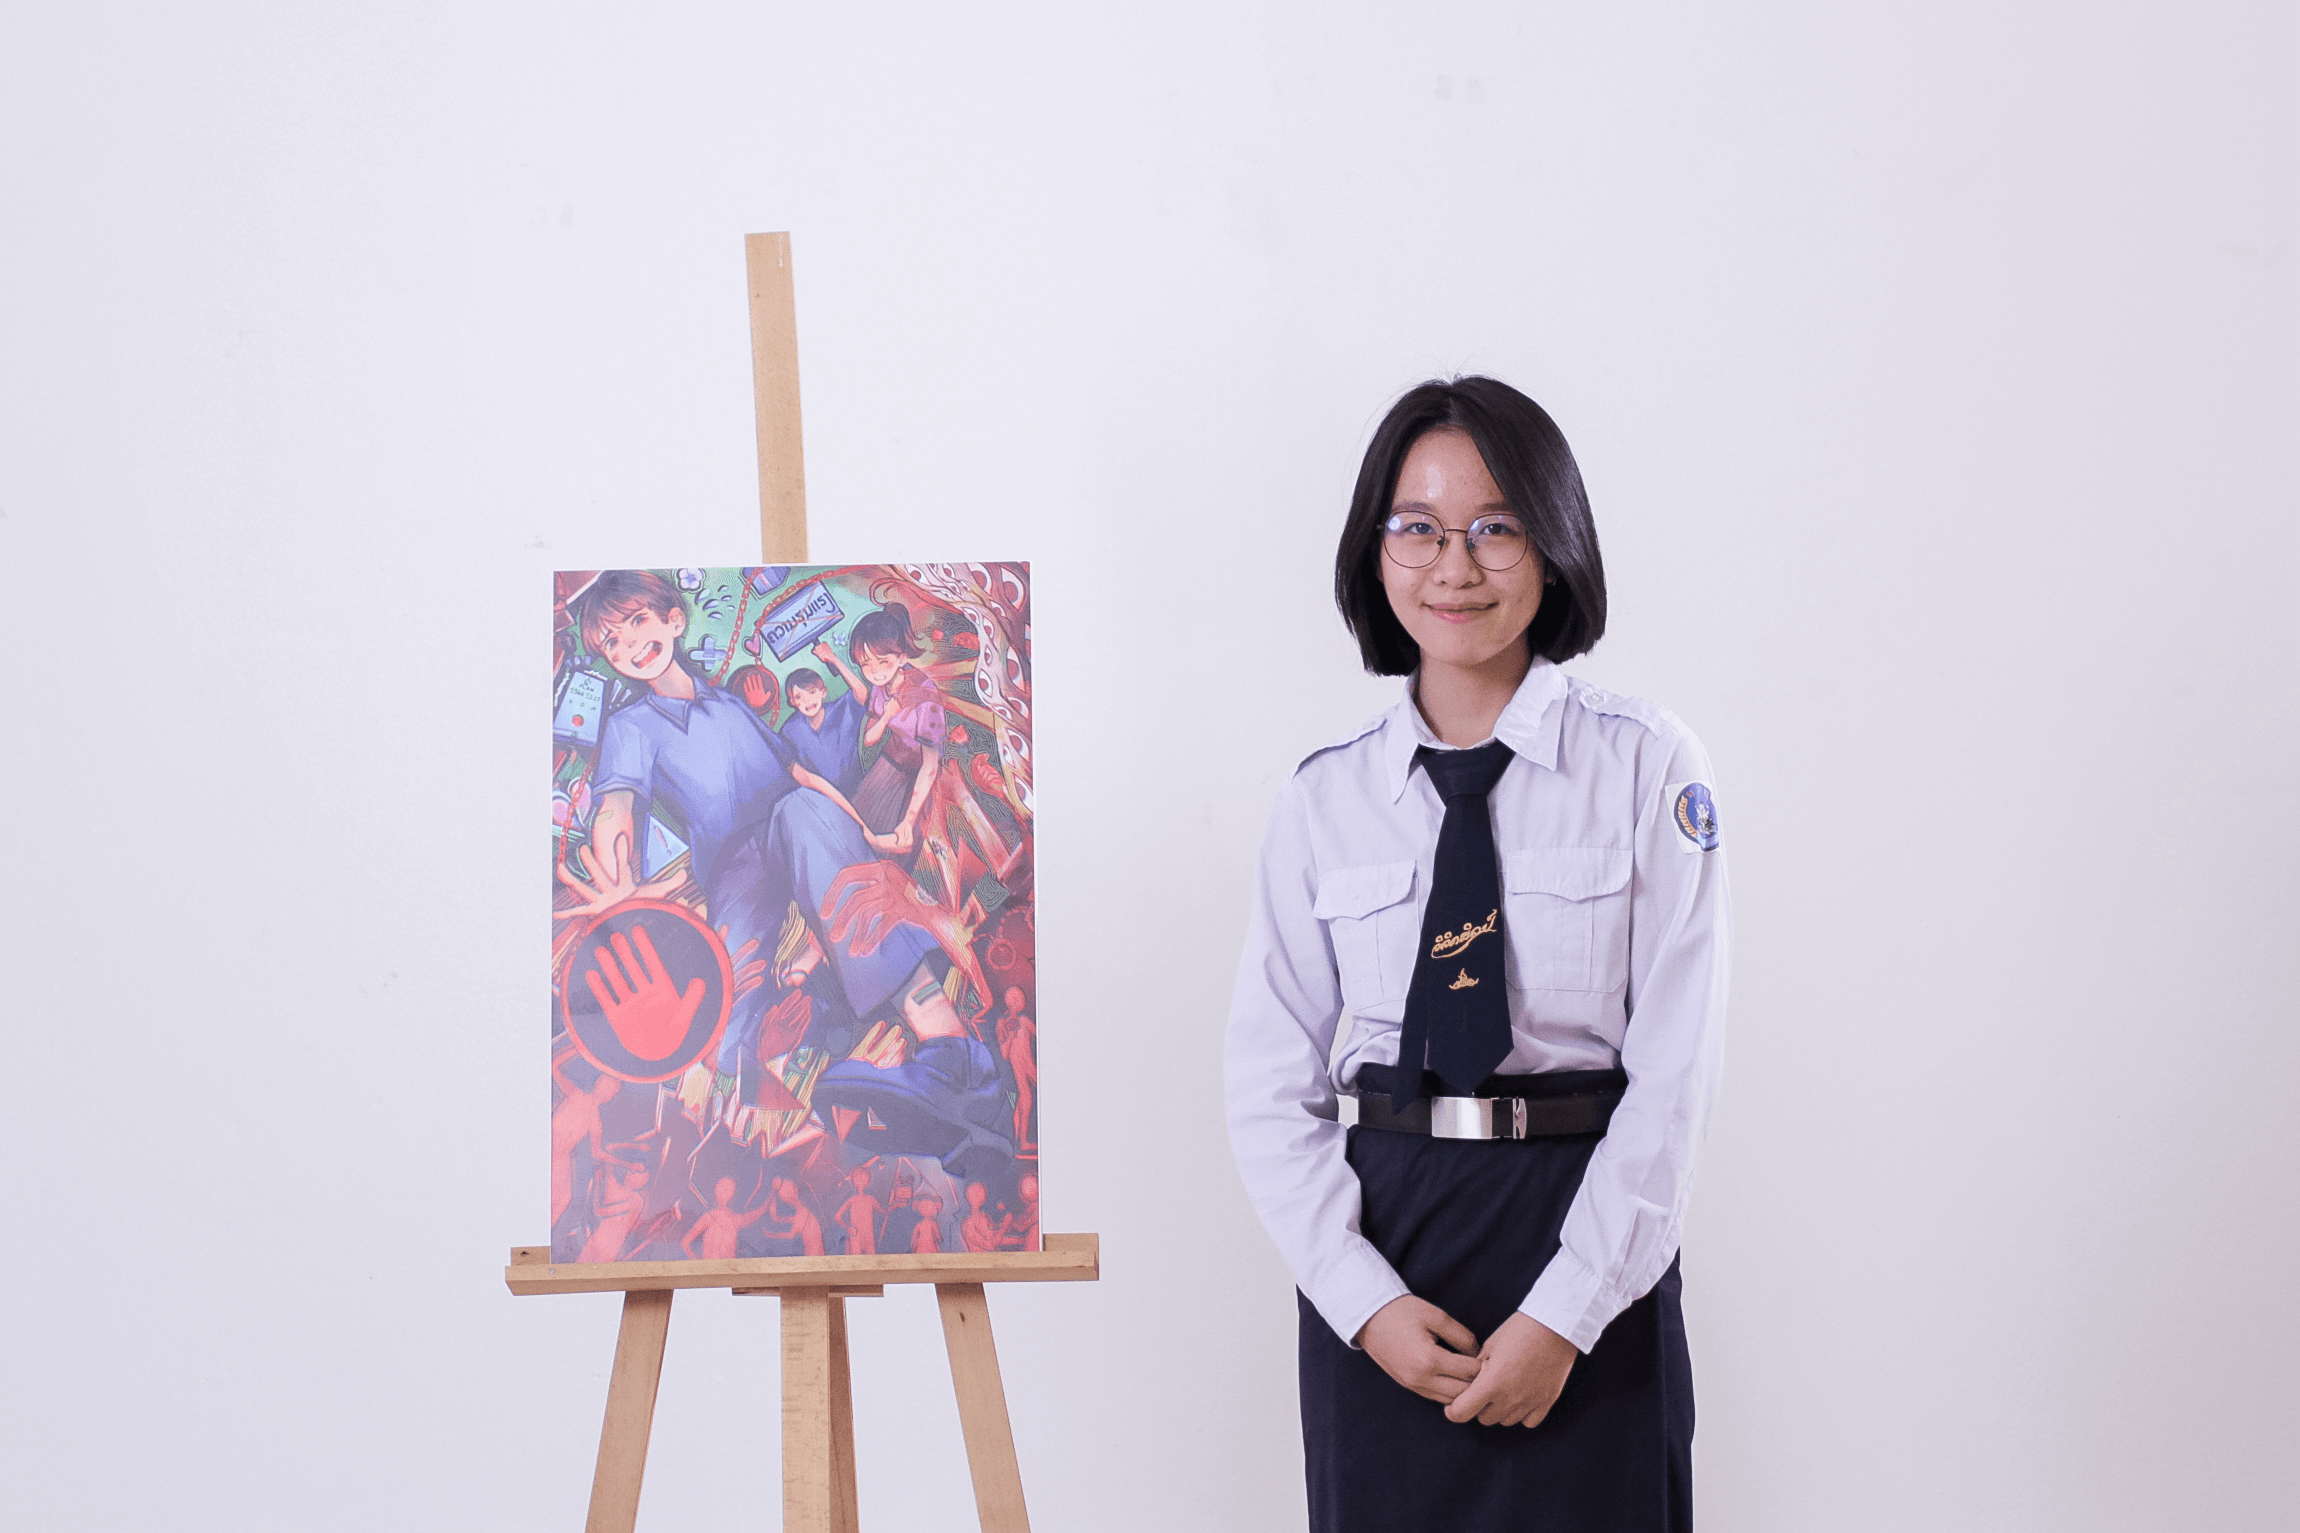 Vannapha standing and smiling with her master artwork.